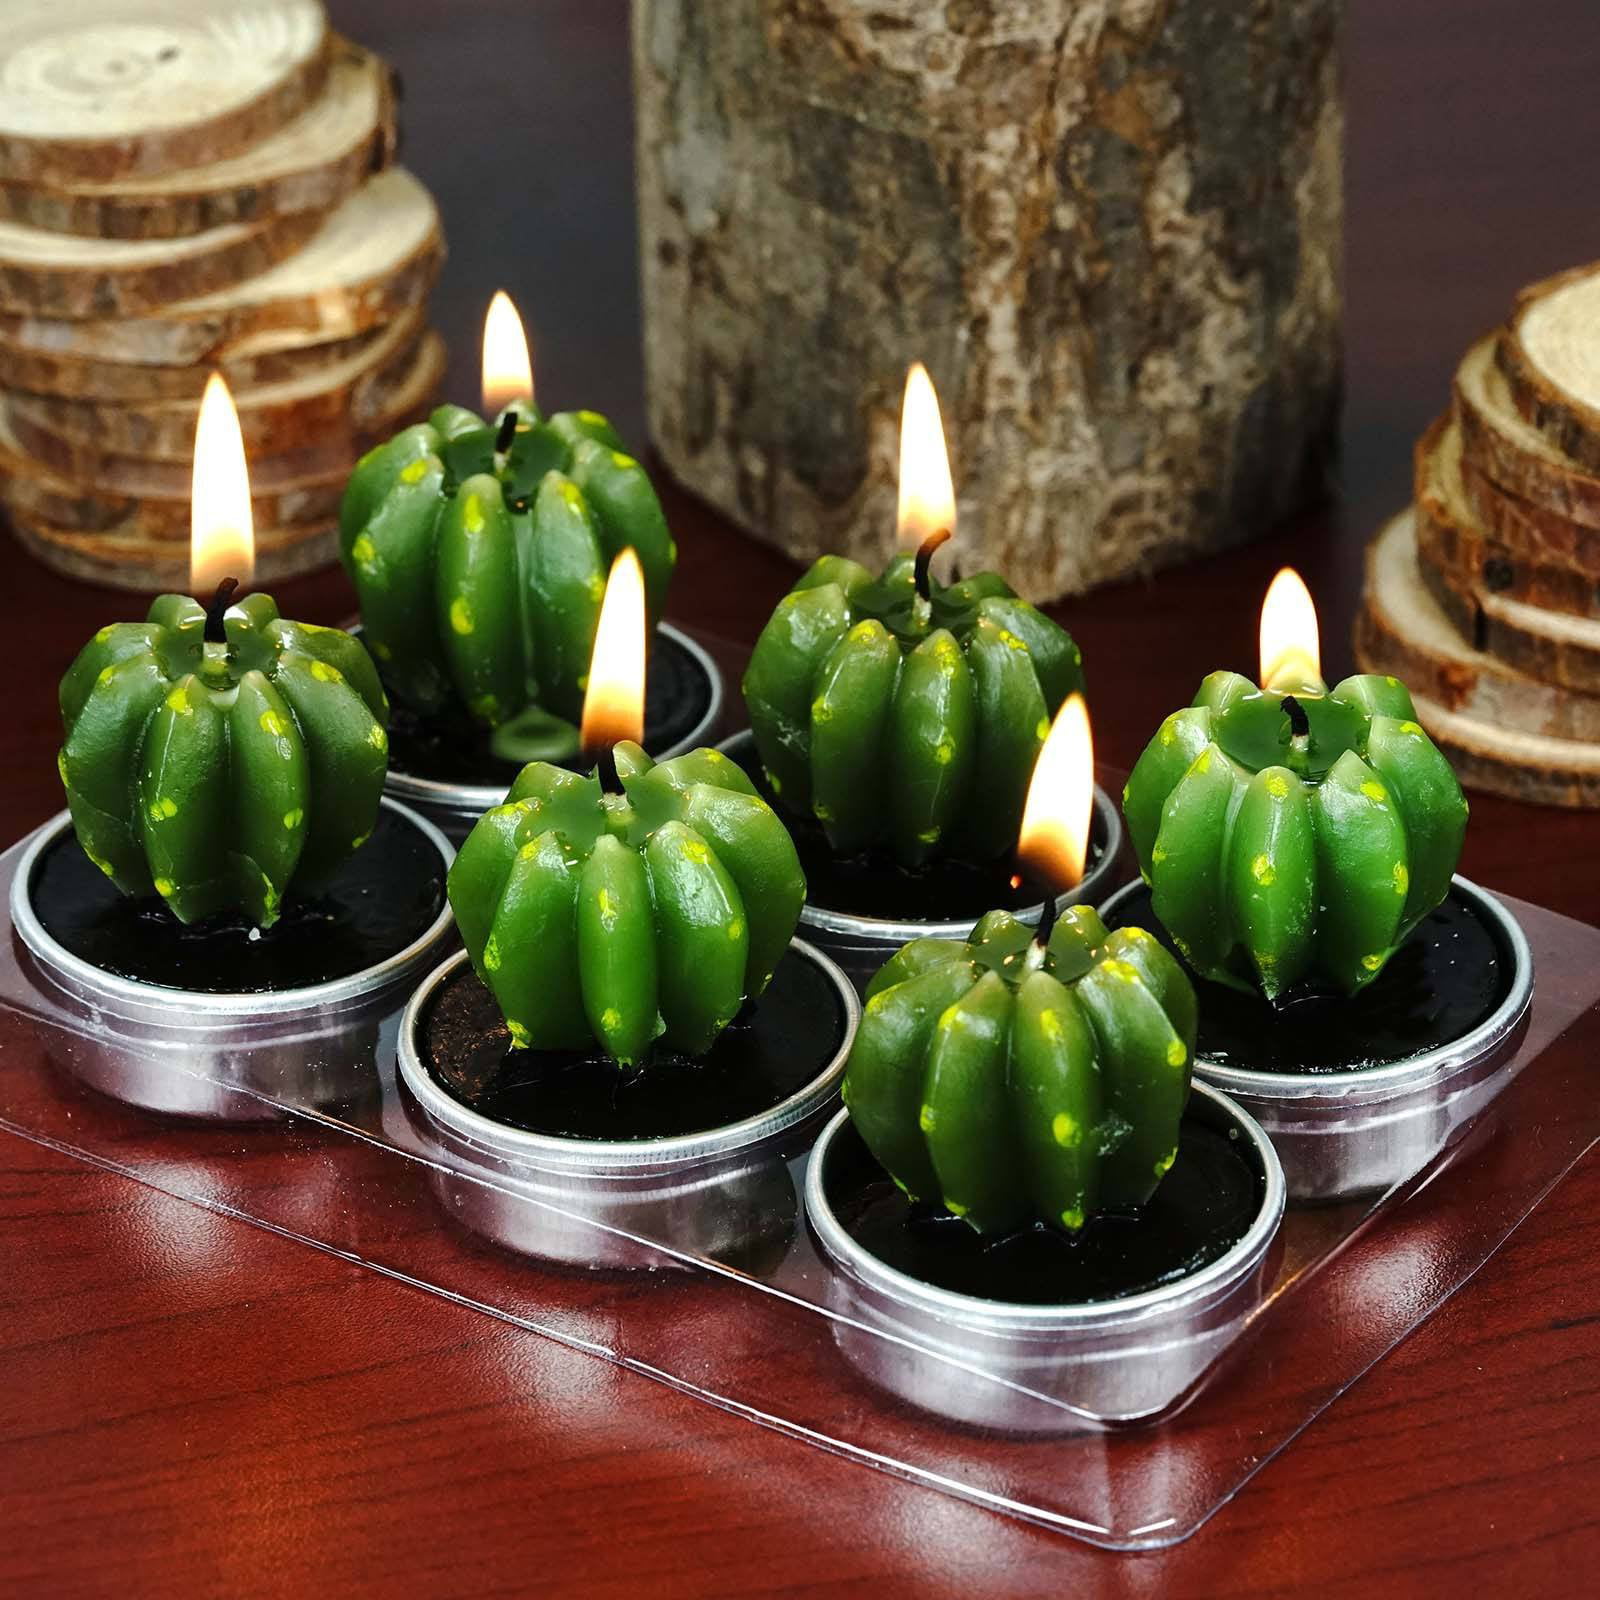 UUsave 12 Pcs Cactus Tealight Candles Decor Handmade Delicate Succulent Cactus Candles for Valentines day Birthday Party Wedding Spa Living Room Home Decoration 12 